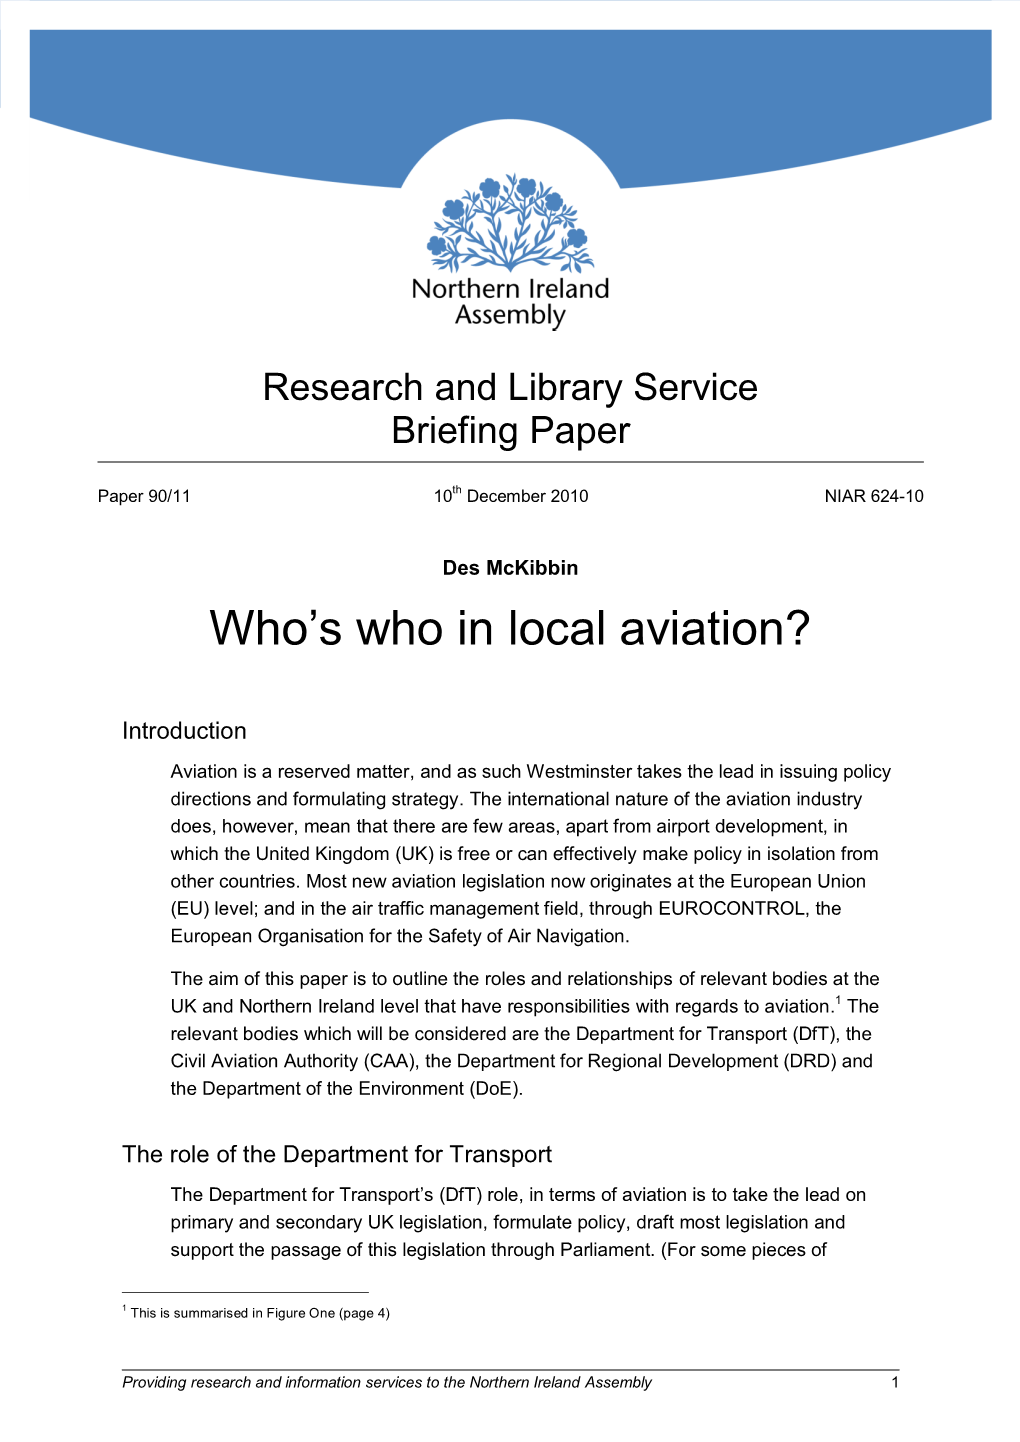 Who's Who in Local Aviation?